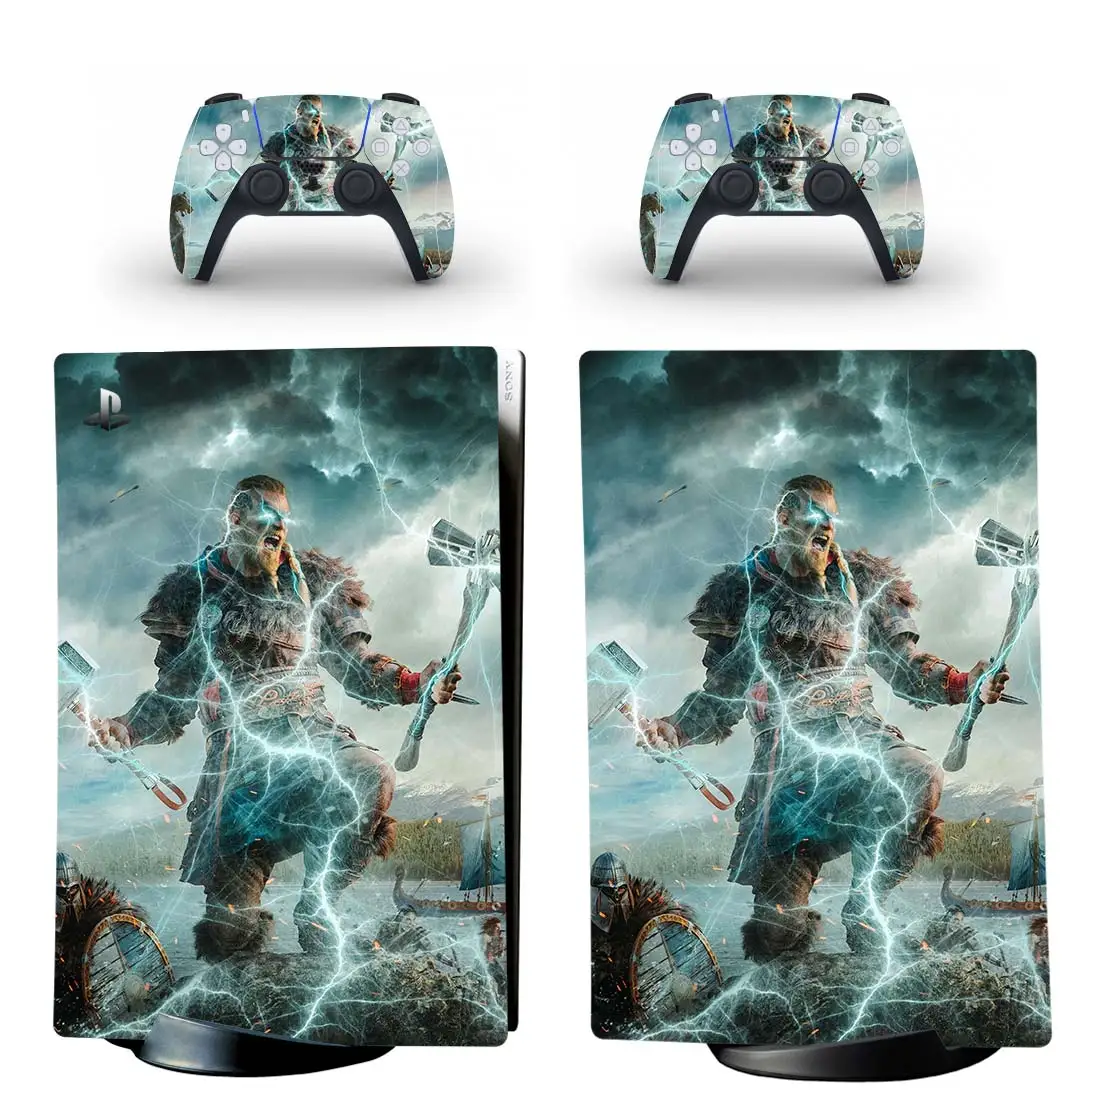 Valhalla PS5 Digital Skin Sticker Decal Cover for PlayStation 5 Console and 2 Controllers PS5 Skin Sticker Vinyl